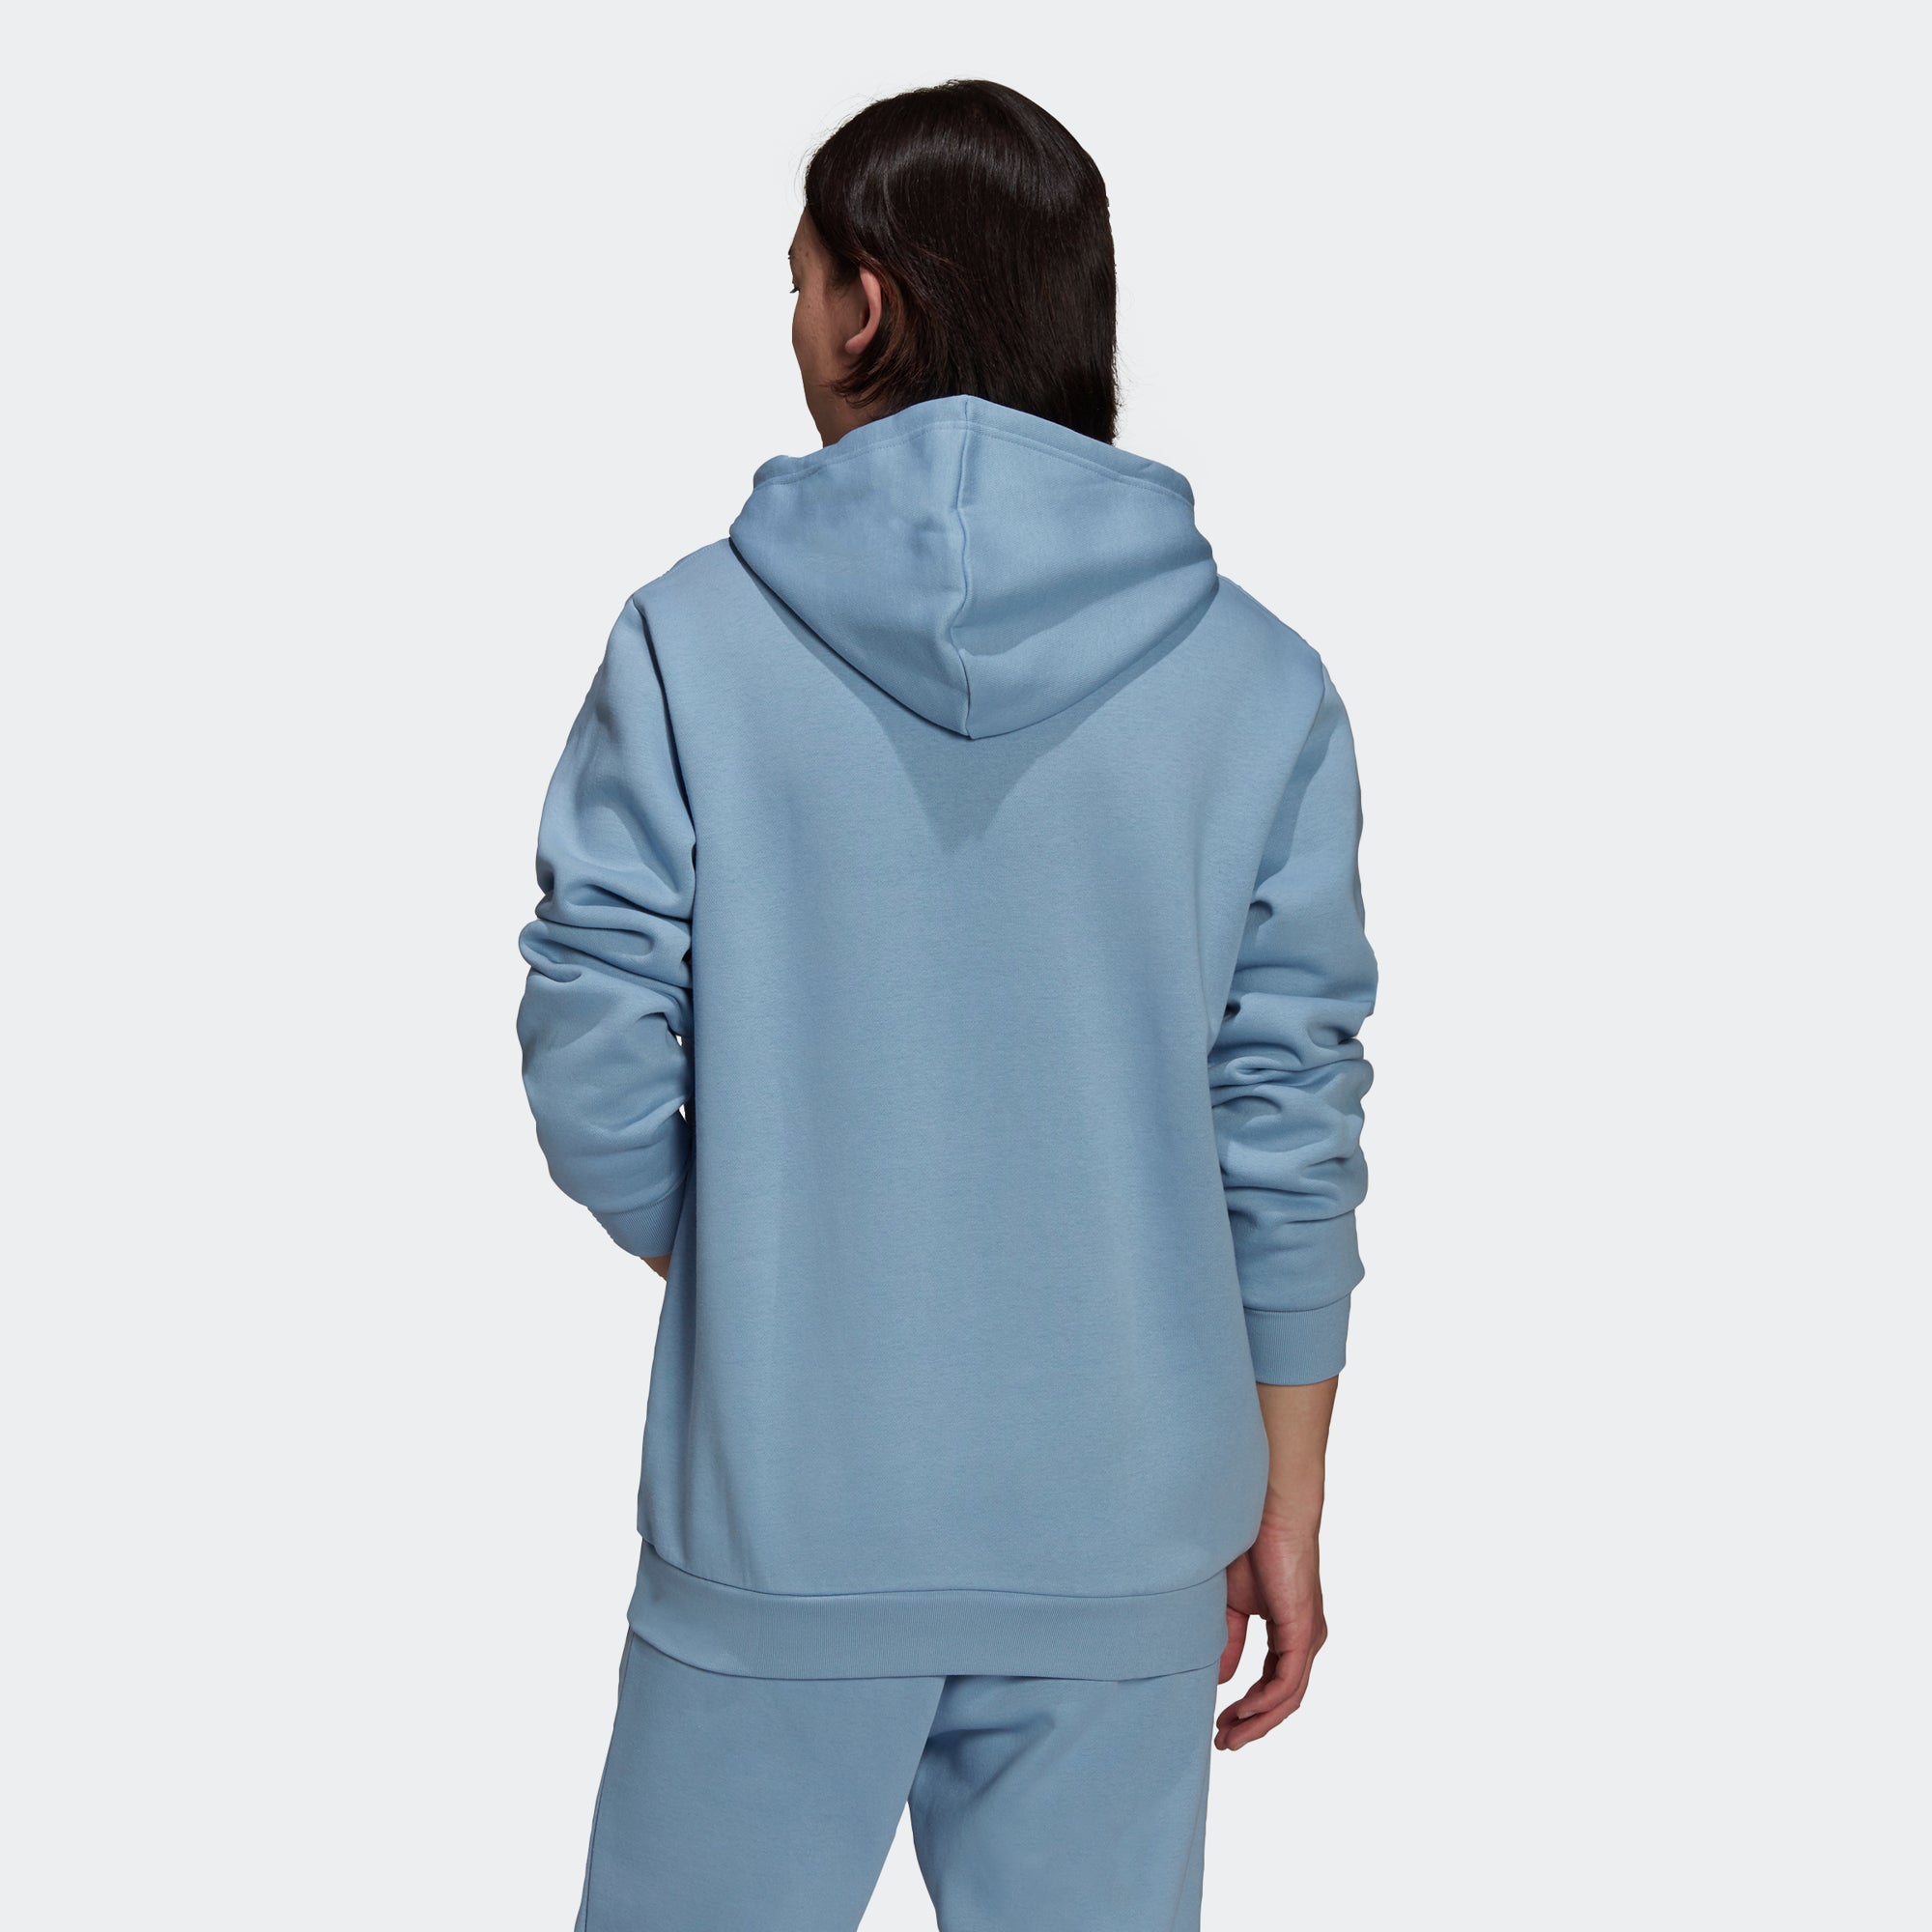 adidas Trefoil Hoodie Ambient Sky HE7199 | Chicago Sports